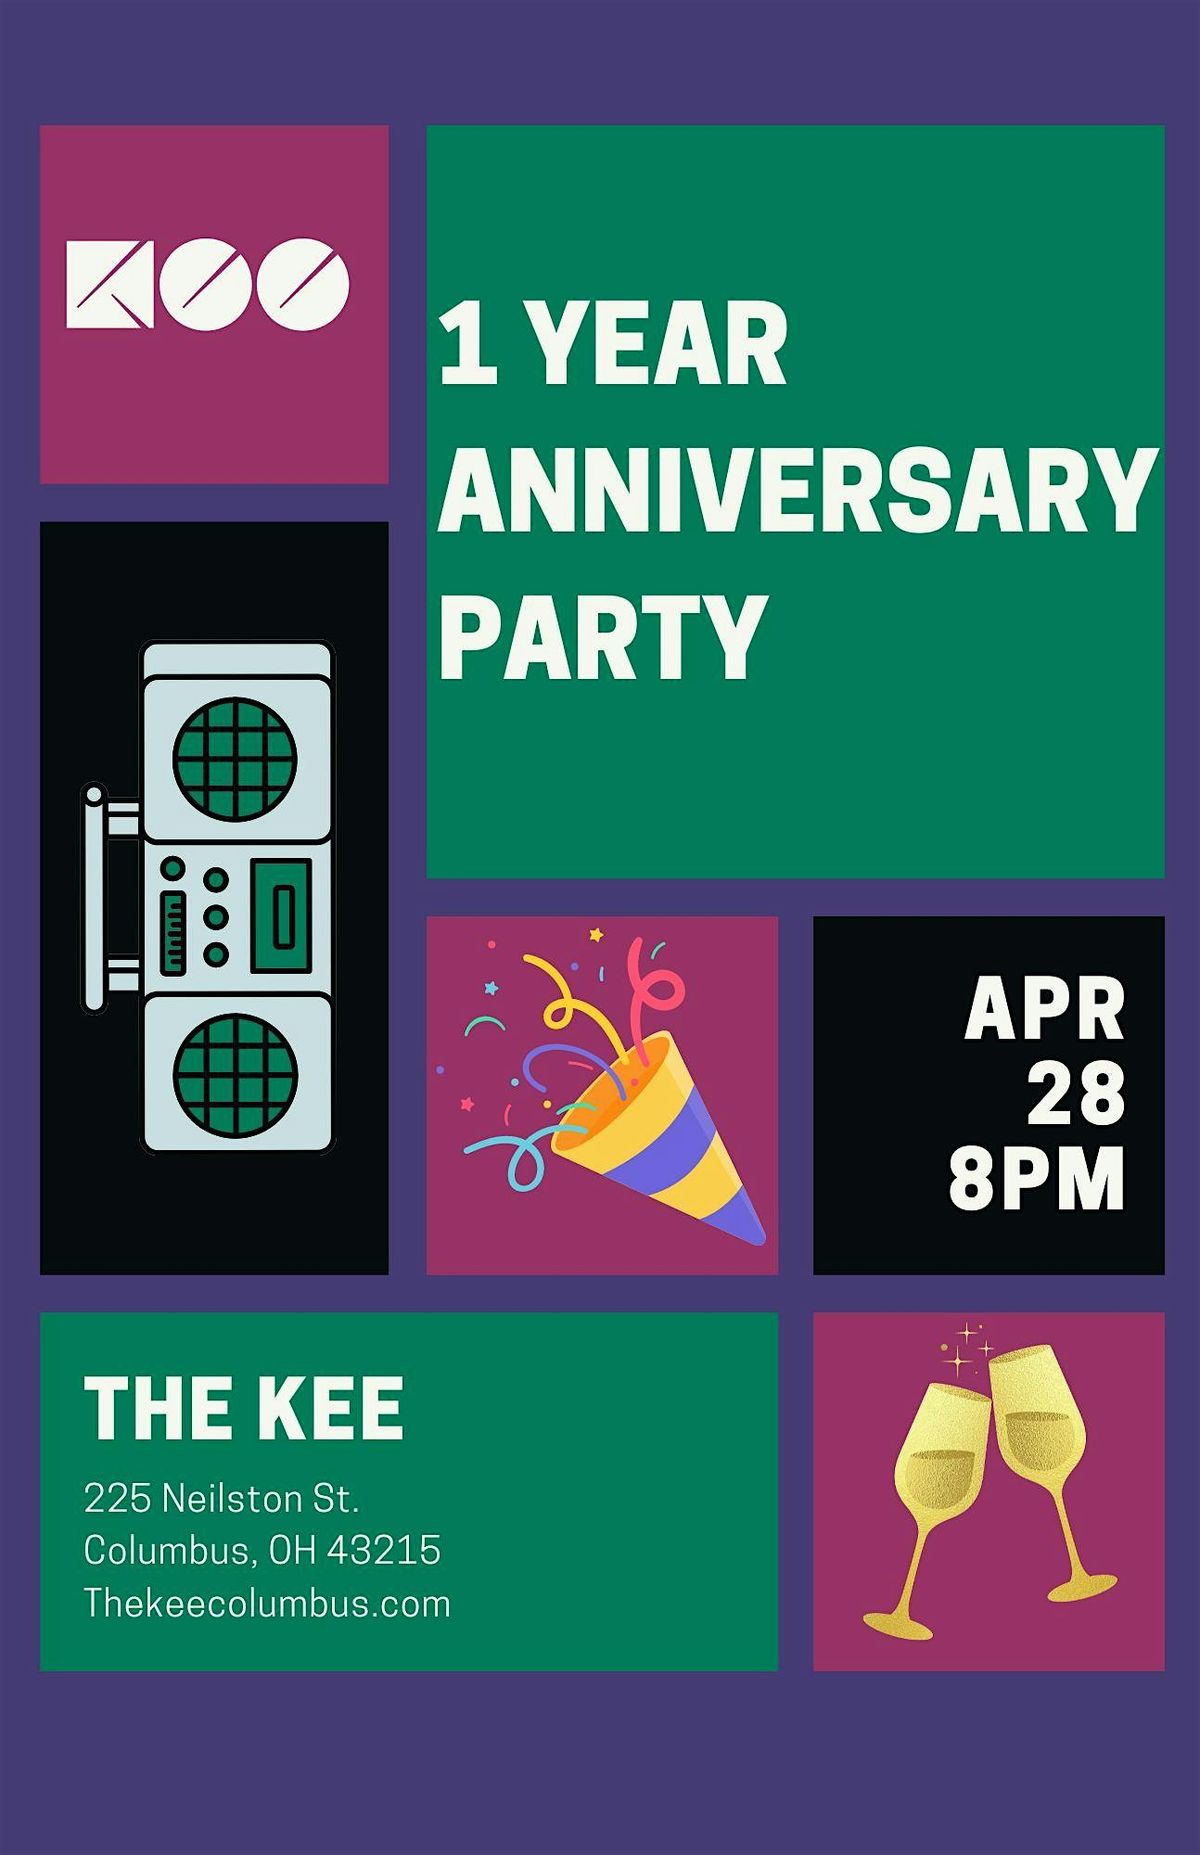 The Kee 1 year anniversary event